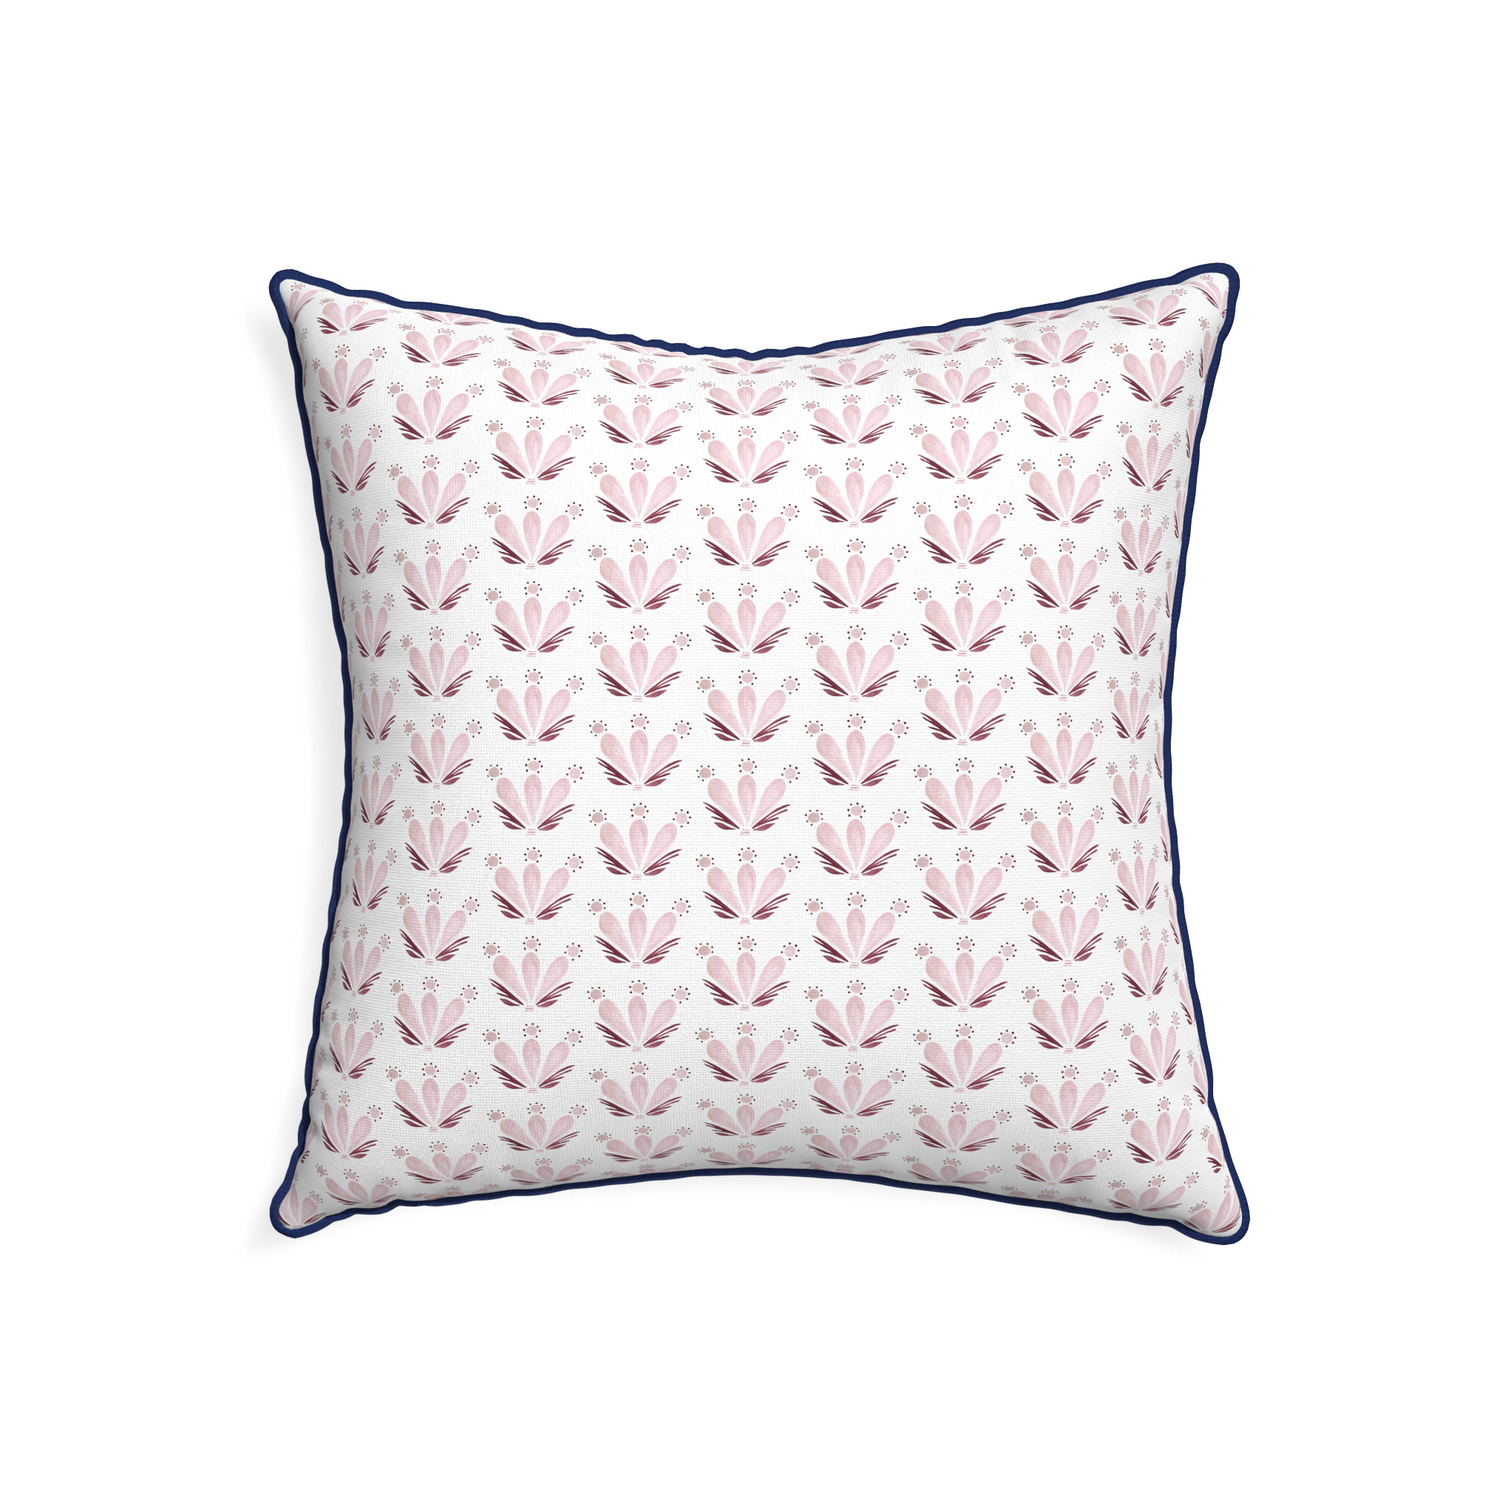 22-square serena pink custom pink & burgundy drop repeat floralpillow with midnight piping on white background